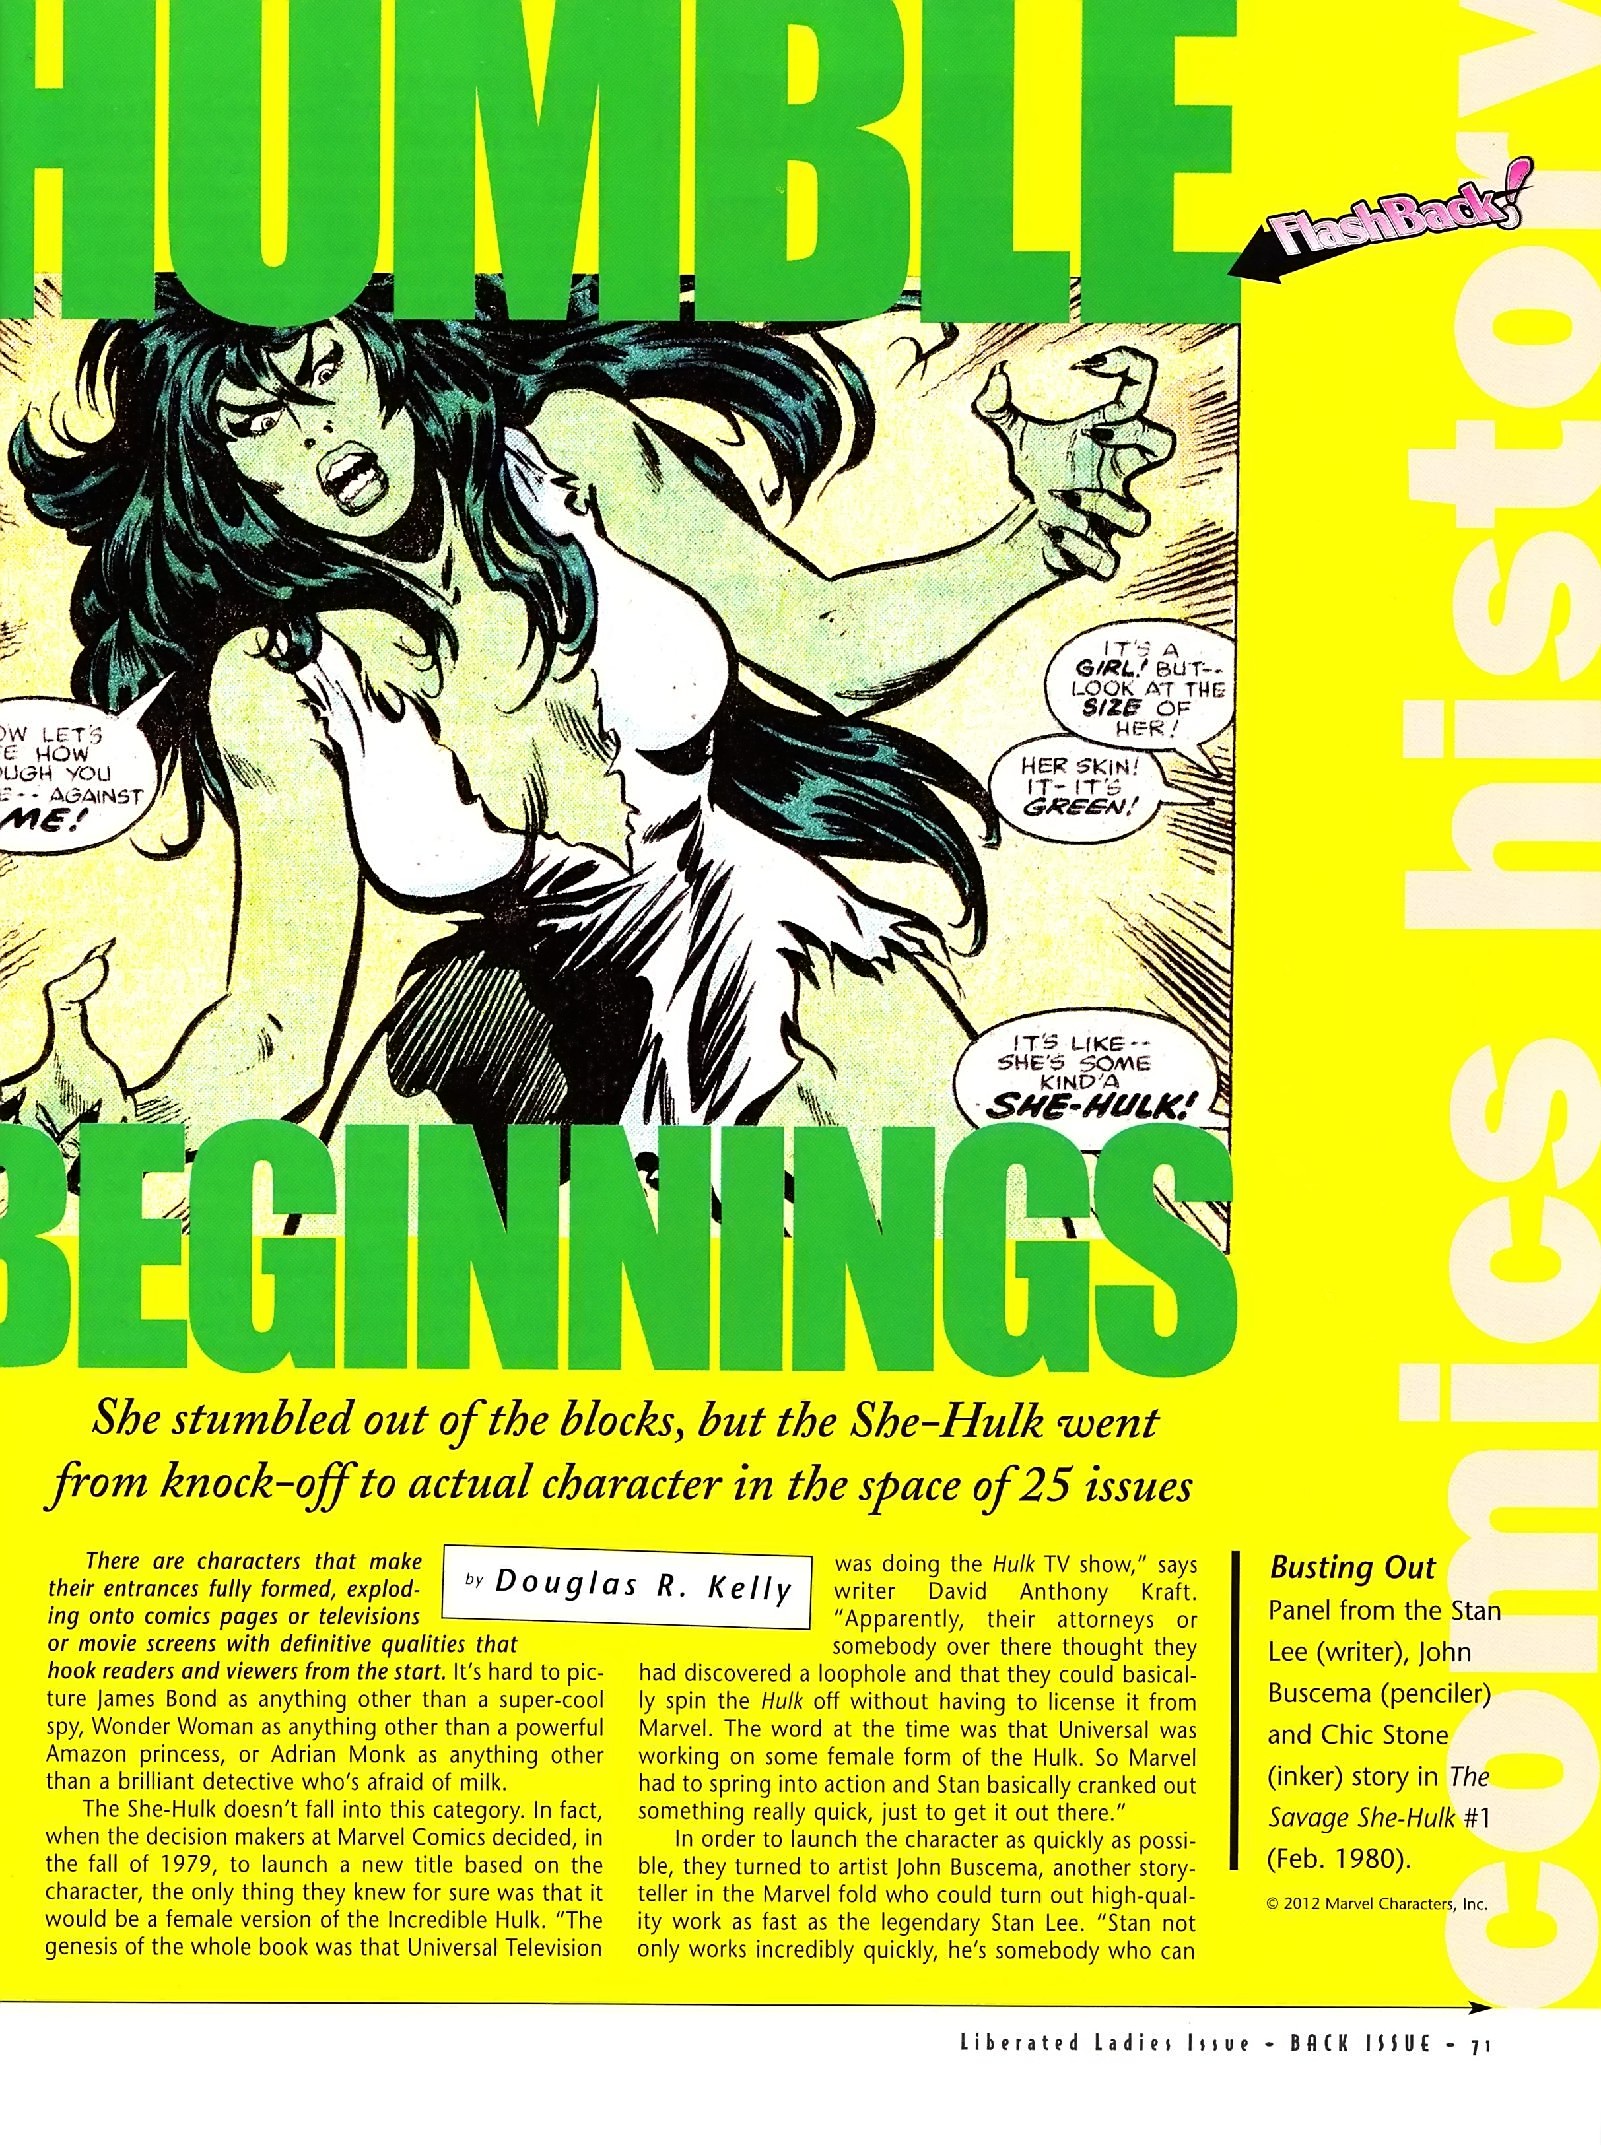 Read online Back Issue comic -  Issue #54 - 70